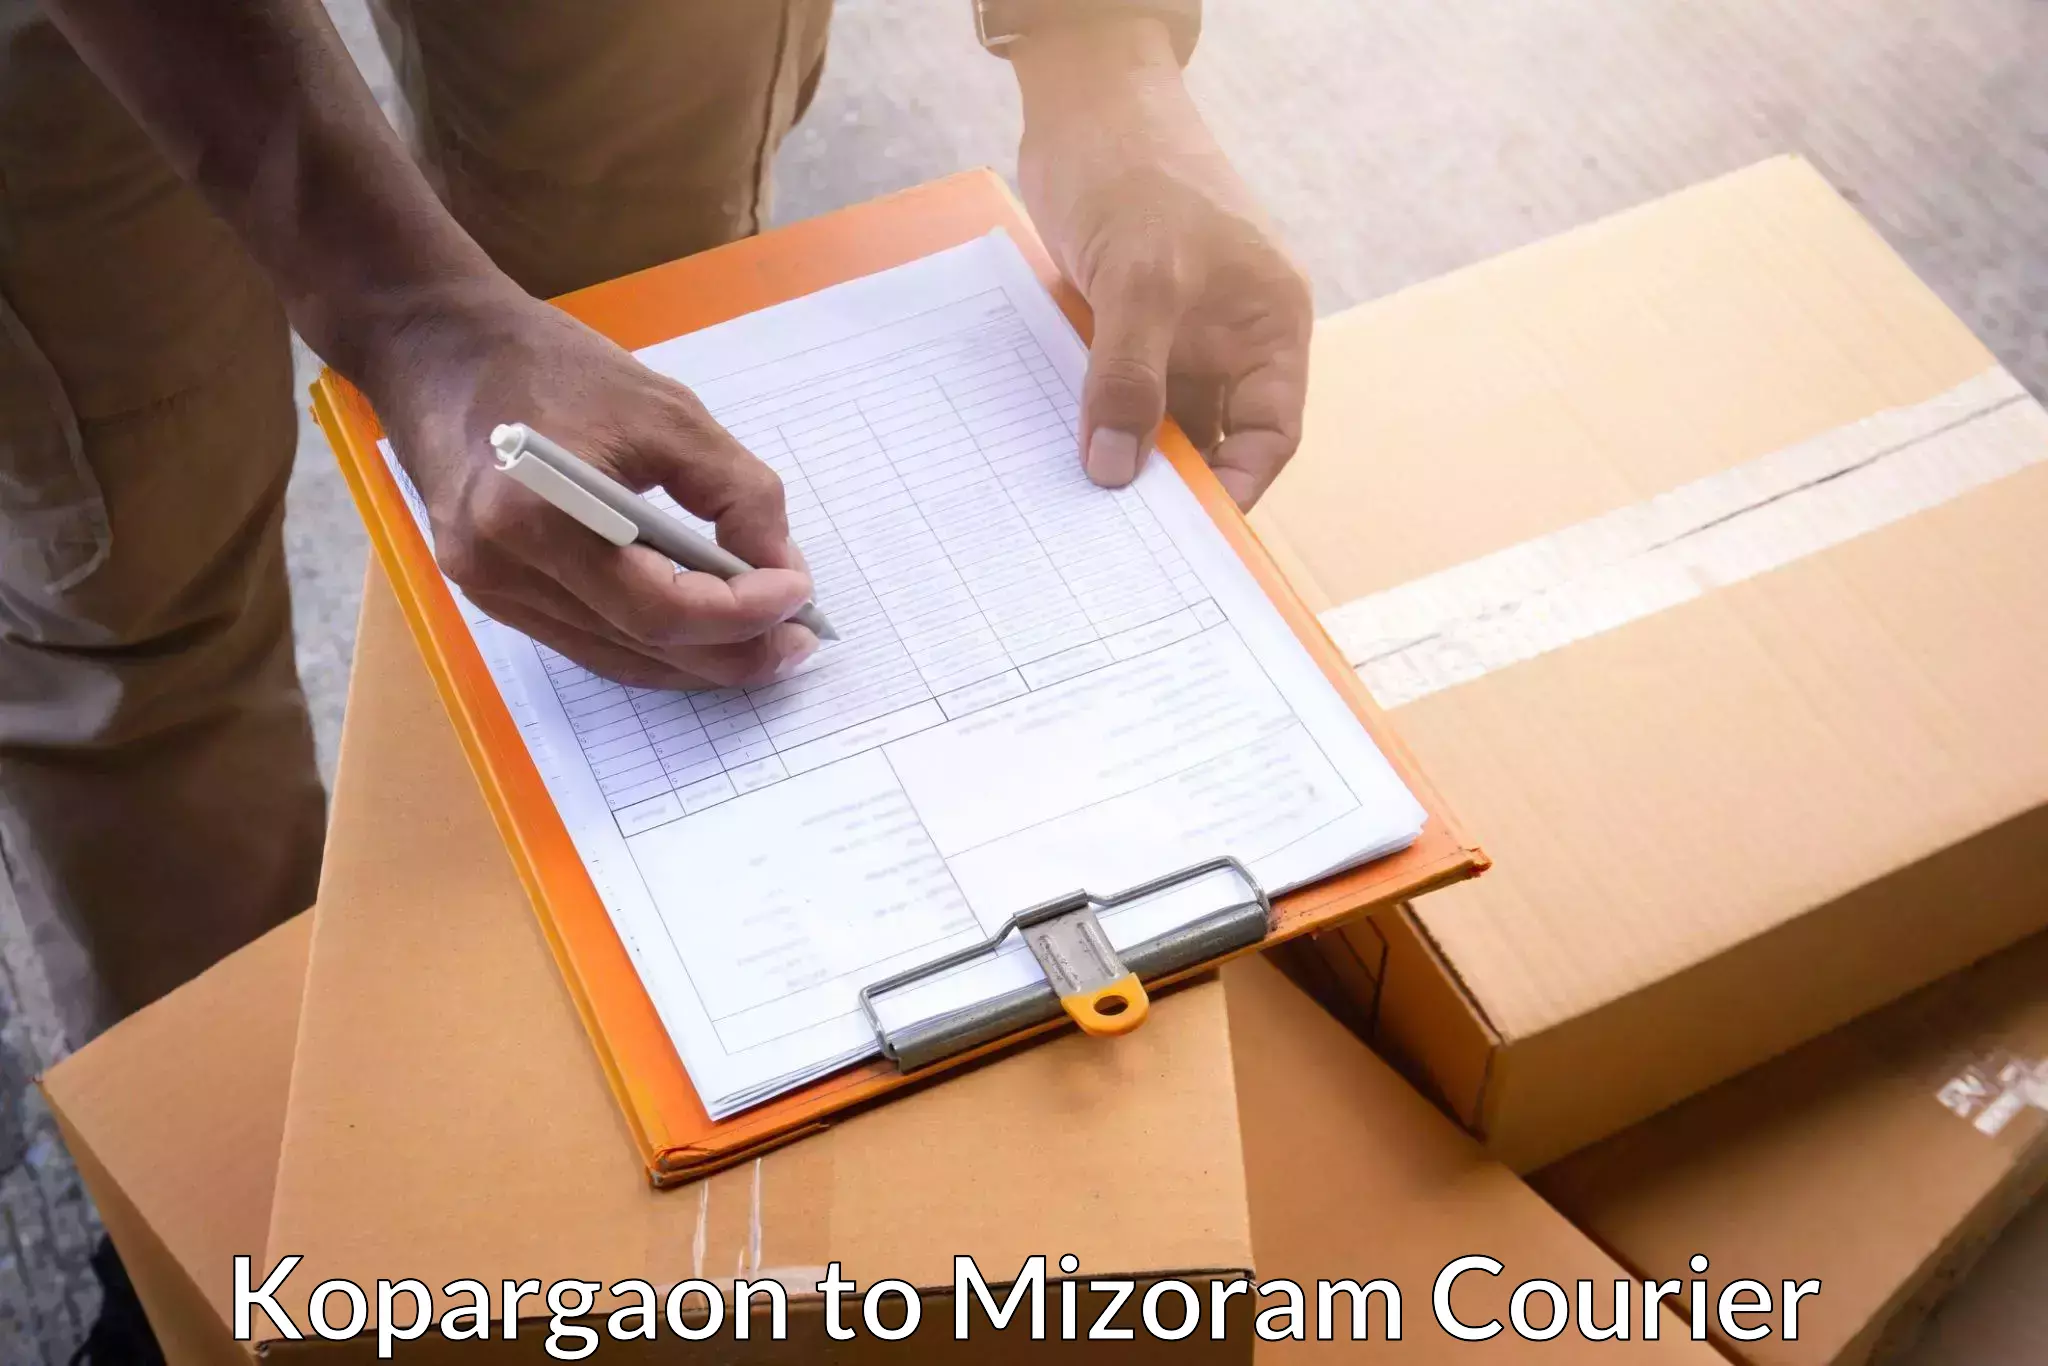 Multi-national courier services Kopargaon to Darlawn